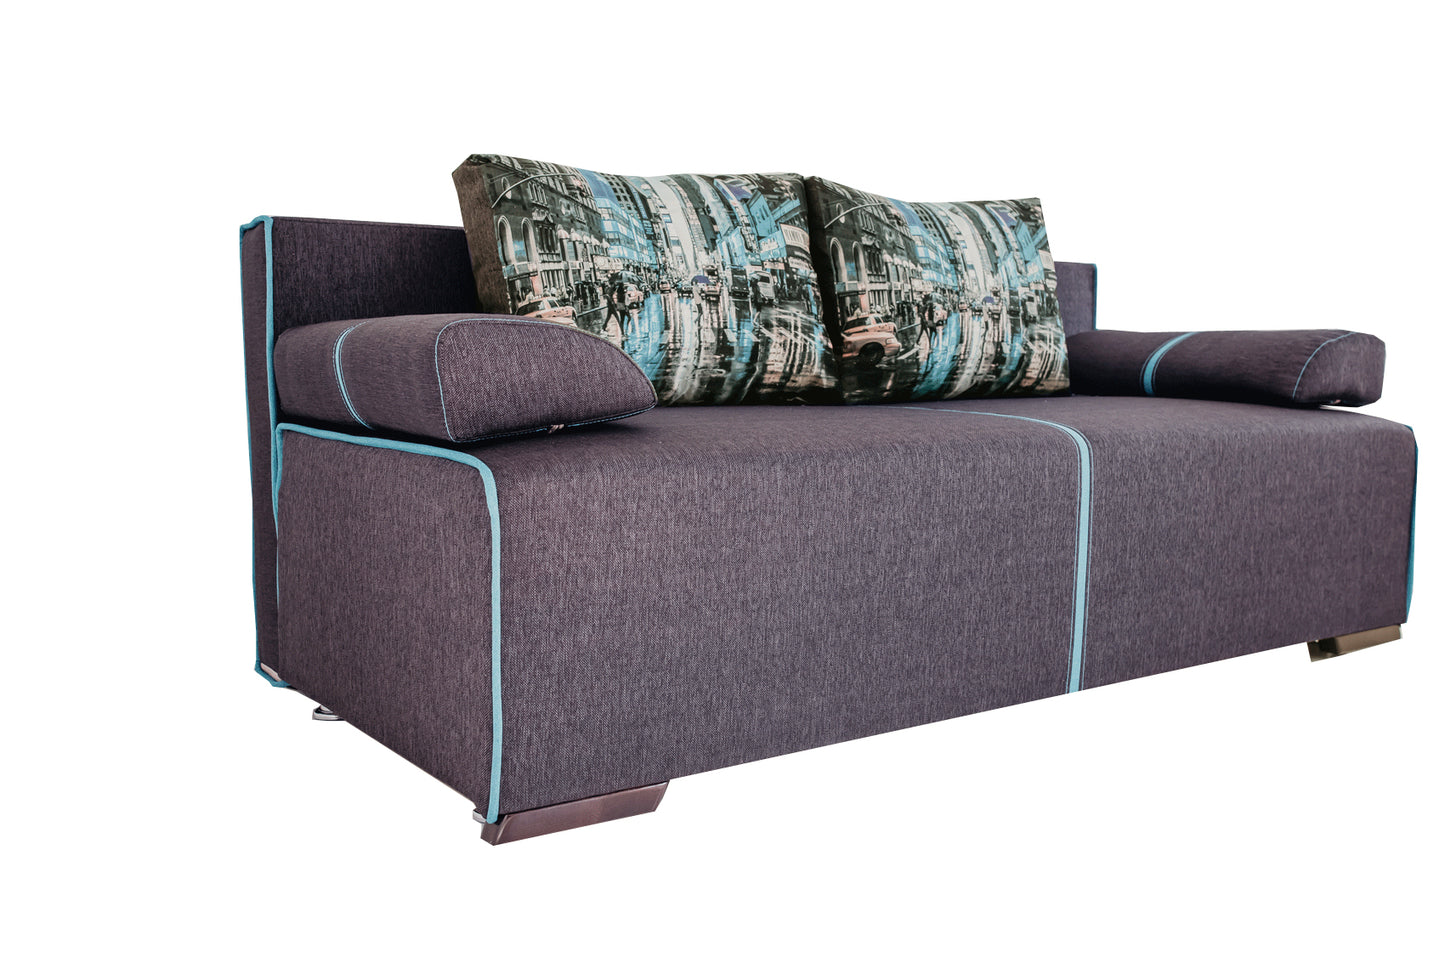 Copy of AVENUE SOFA BED AND STORAGE - GREY